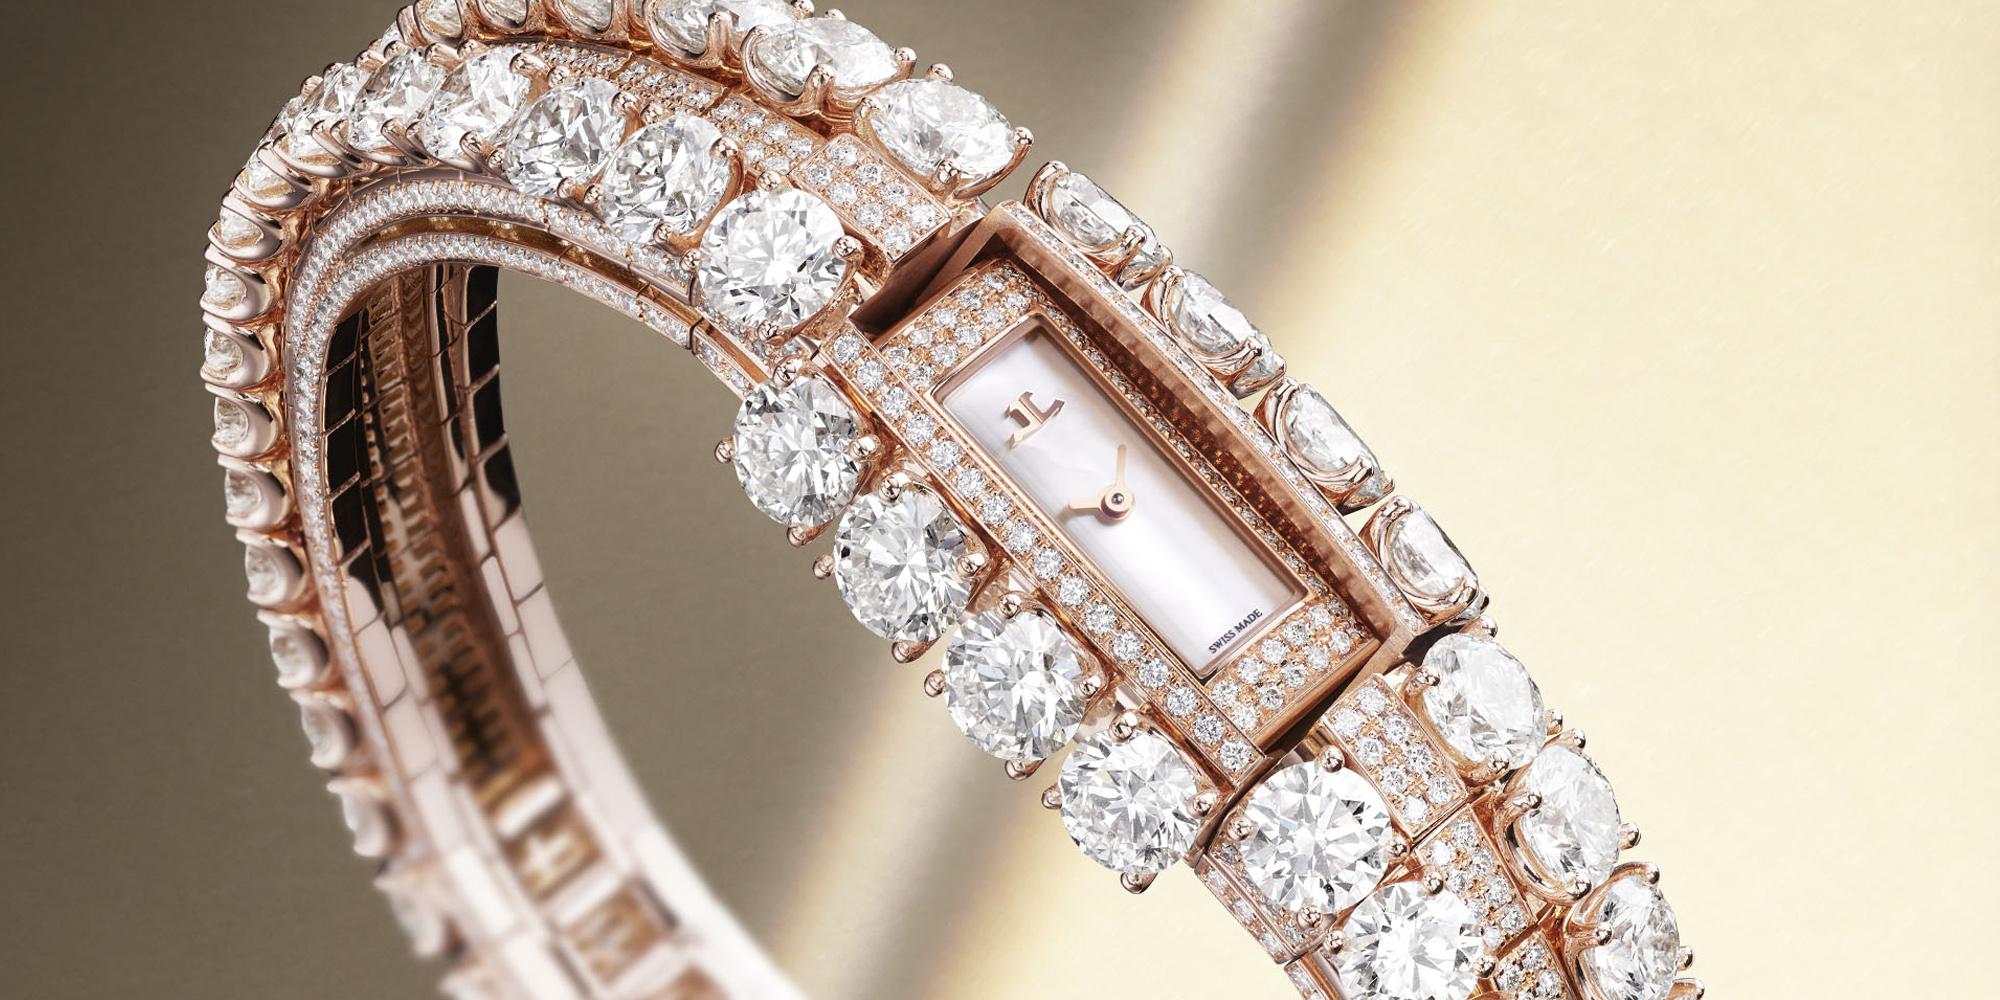 JAEGER LECOULTRE CALIBER 101 HIGH JEWERLY TIMEPIECE COLLECTION